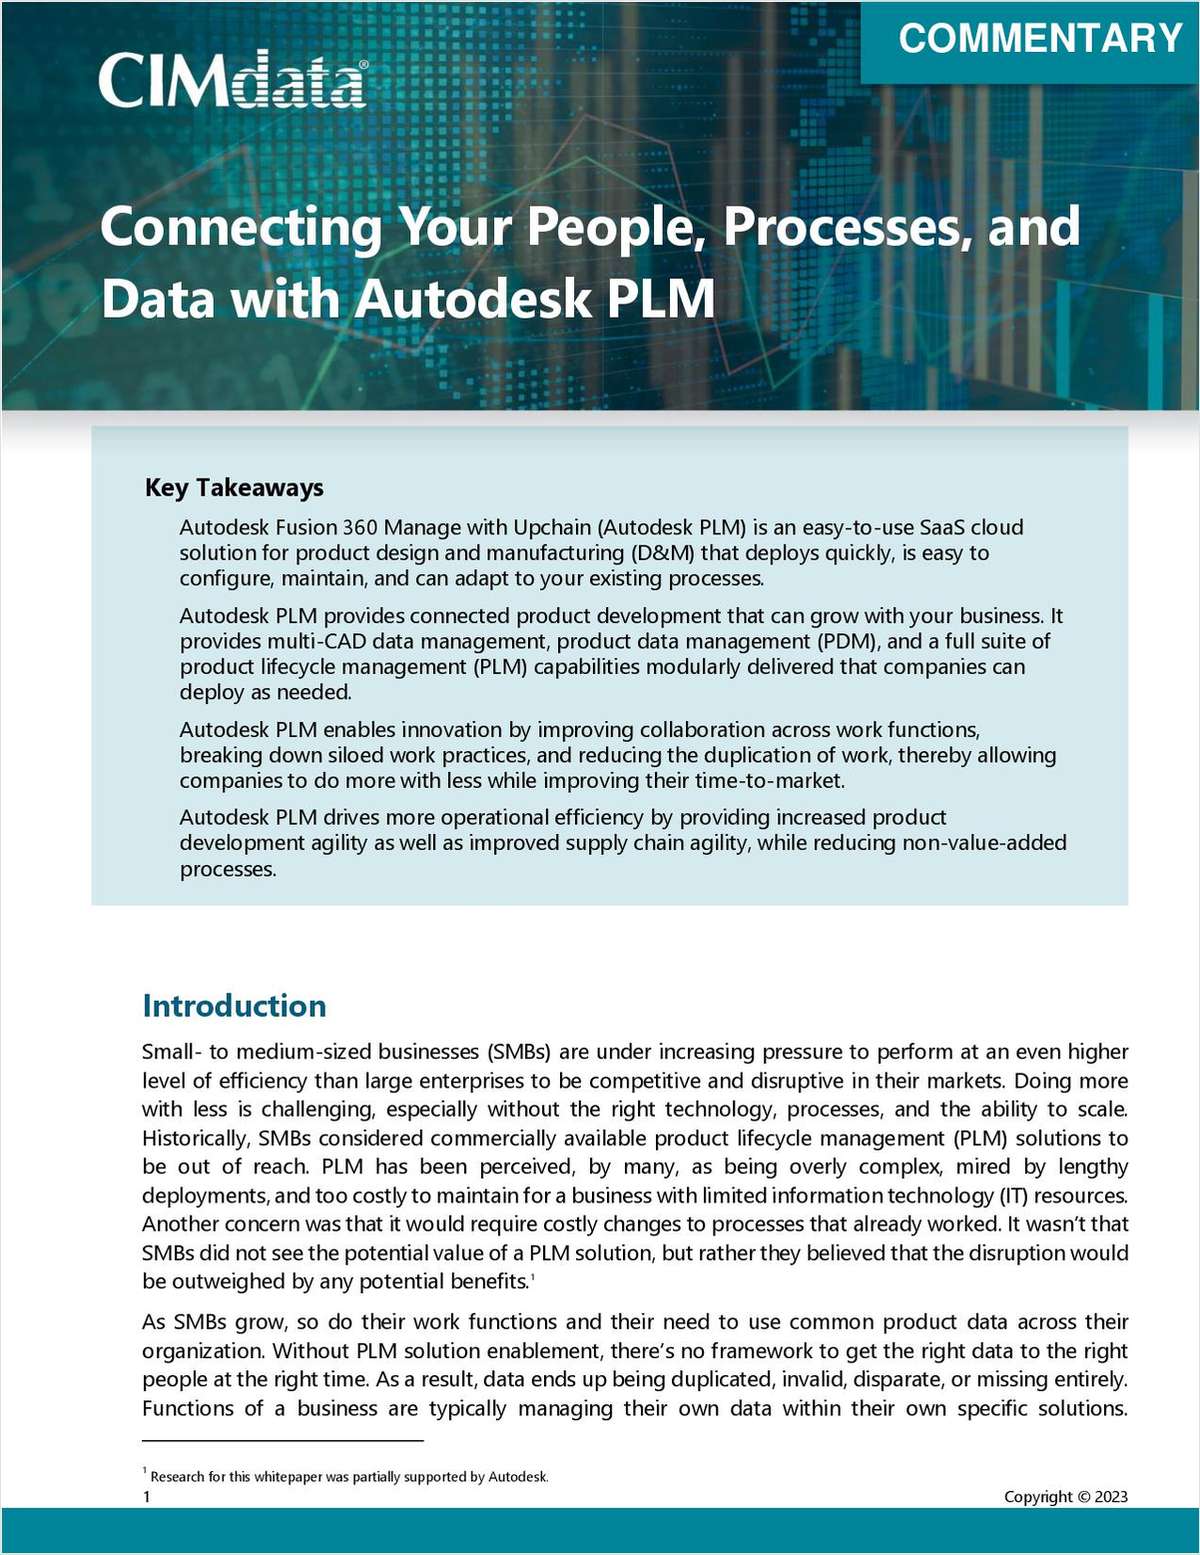 Connecting Your People, Processes, and Data with Autodesk PLM